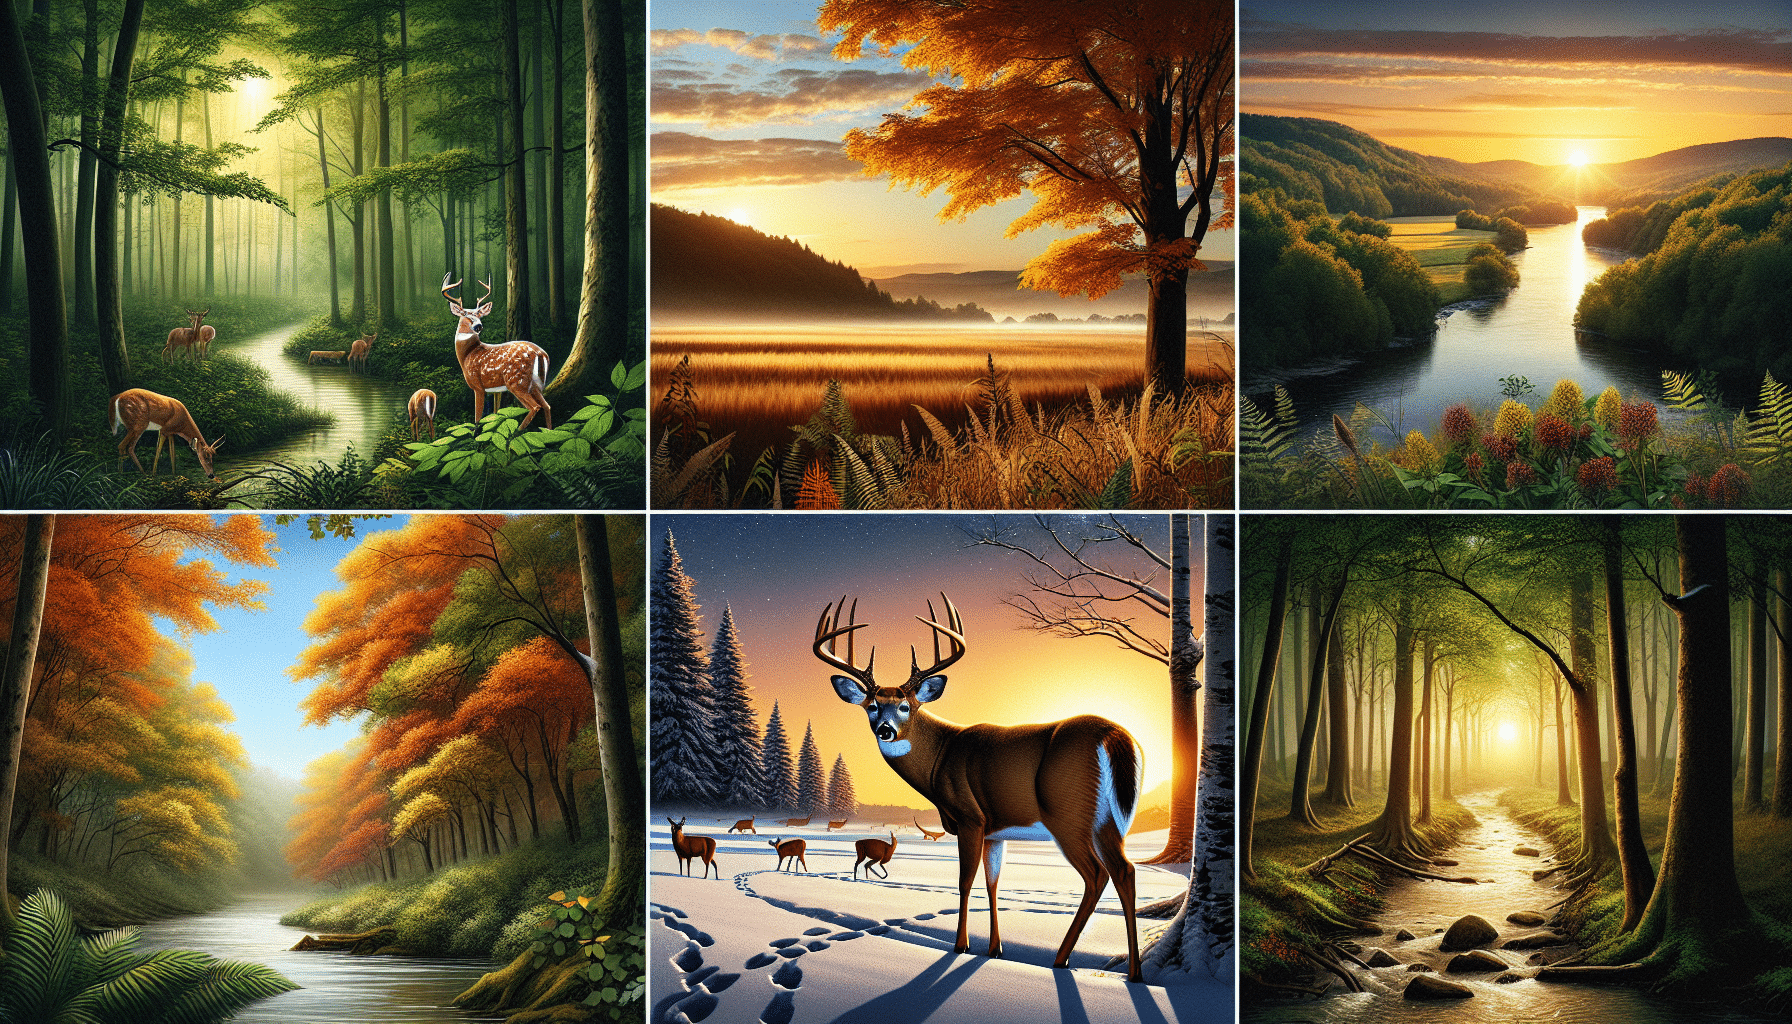 Visualize a tranquil and lush environment that symbolizes some of the top states for whitetail deer hunting. The first scene is a serene forest during autumn, its leaves taking on a beautiful change of color, with a whitetail deer cautiously peeping from behind a cluster of trees. The second captures a vast field bordered by dense woods, a deer grazing peacefully, the sunrise painting the sky with warm colors. The third image is of a snowy, quiet woodland with tracks of deer visible. The fourth forest surrounded by rolling hills under a golden setting sun with a deer silhouette in the distance. The final, a river winding through a lush green forest, a deer drinking water by the riverside, capturing the essence of uninterrupted natural habitats.